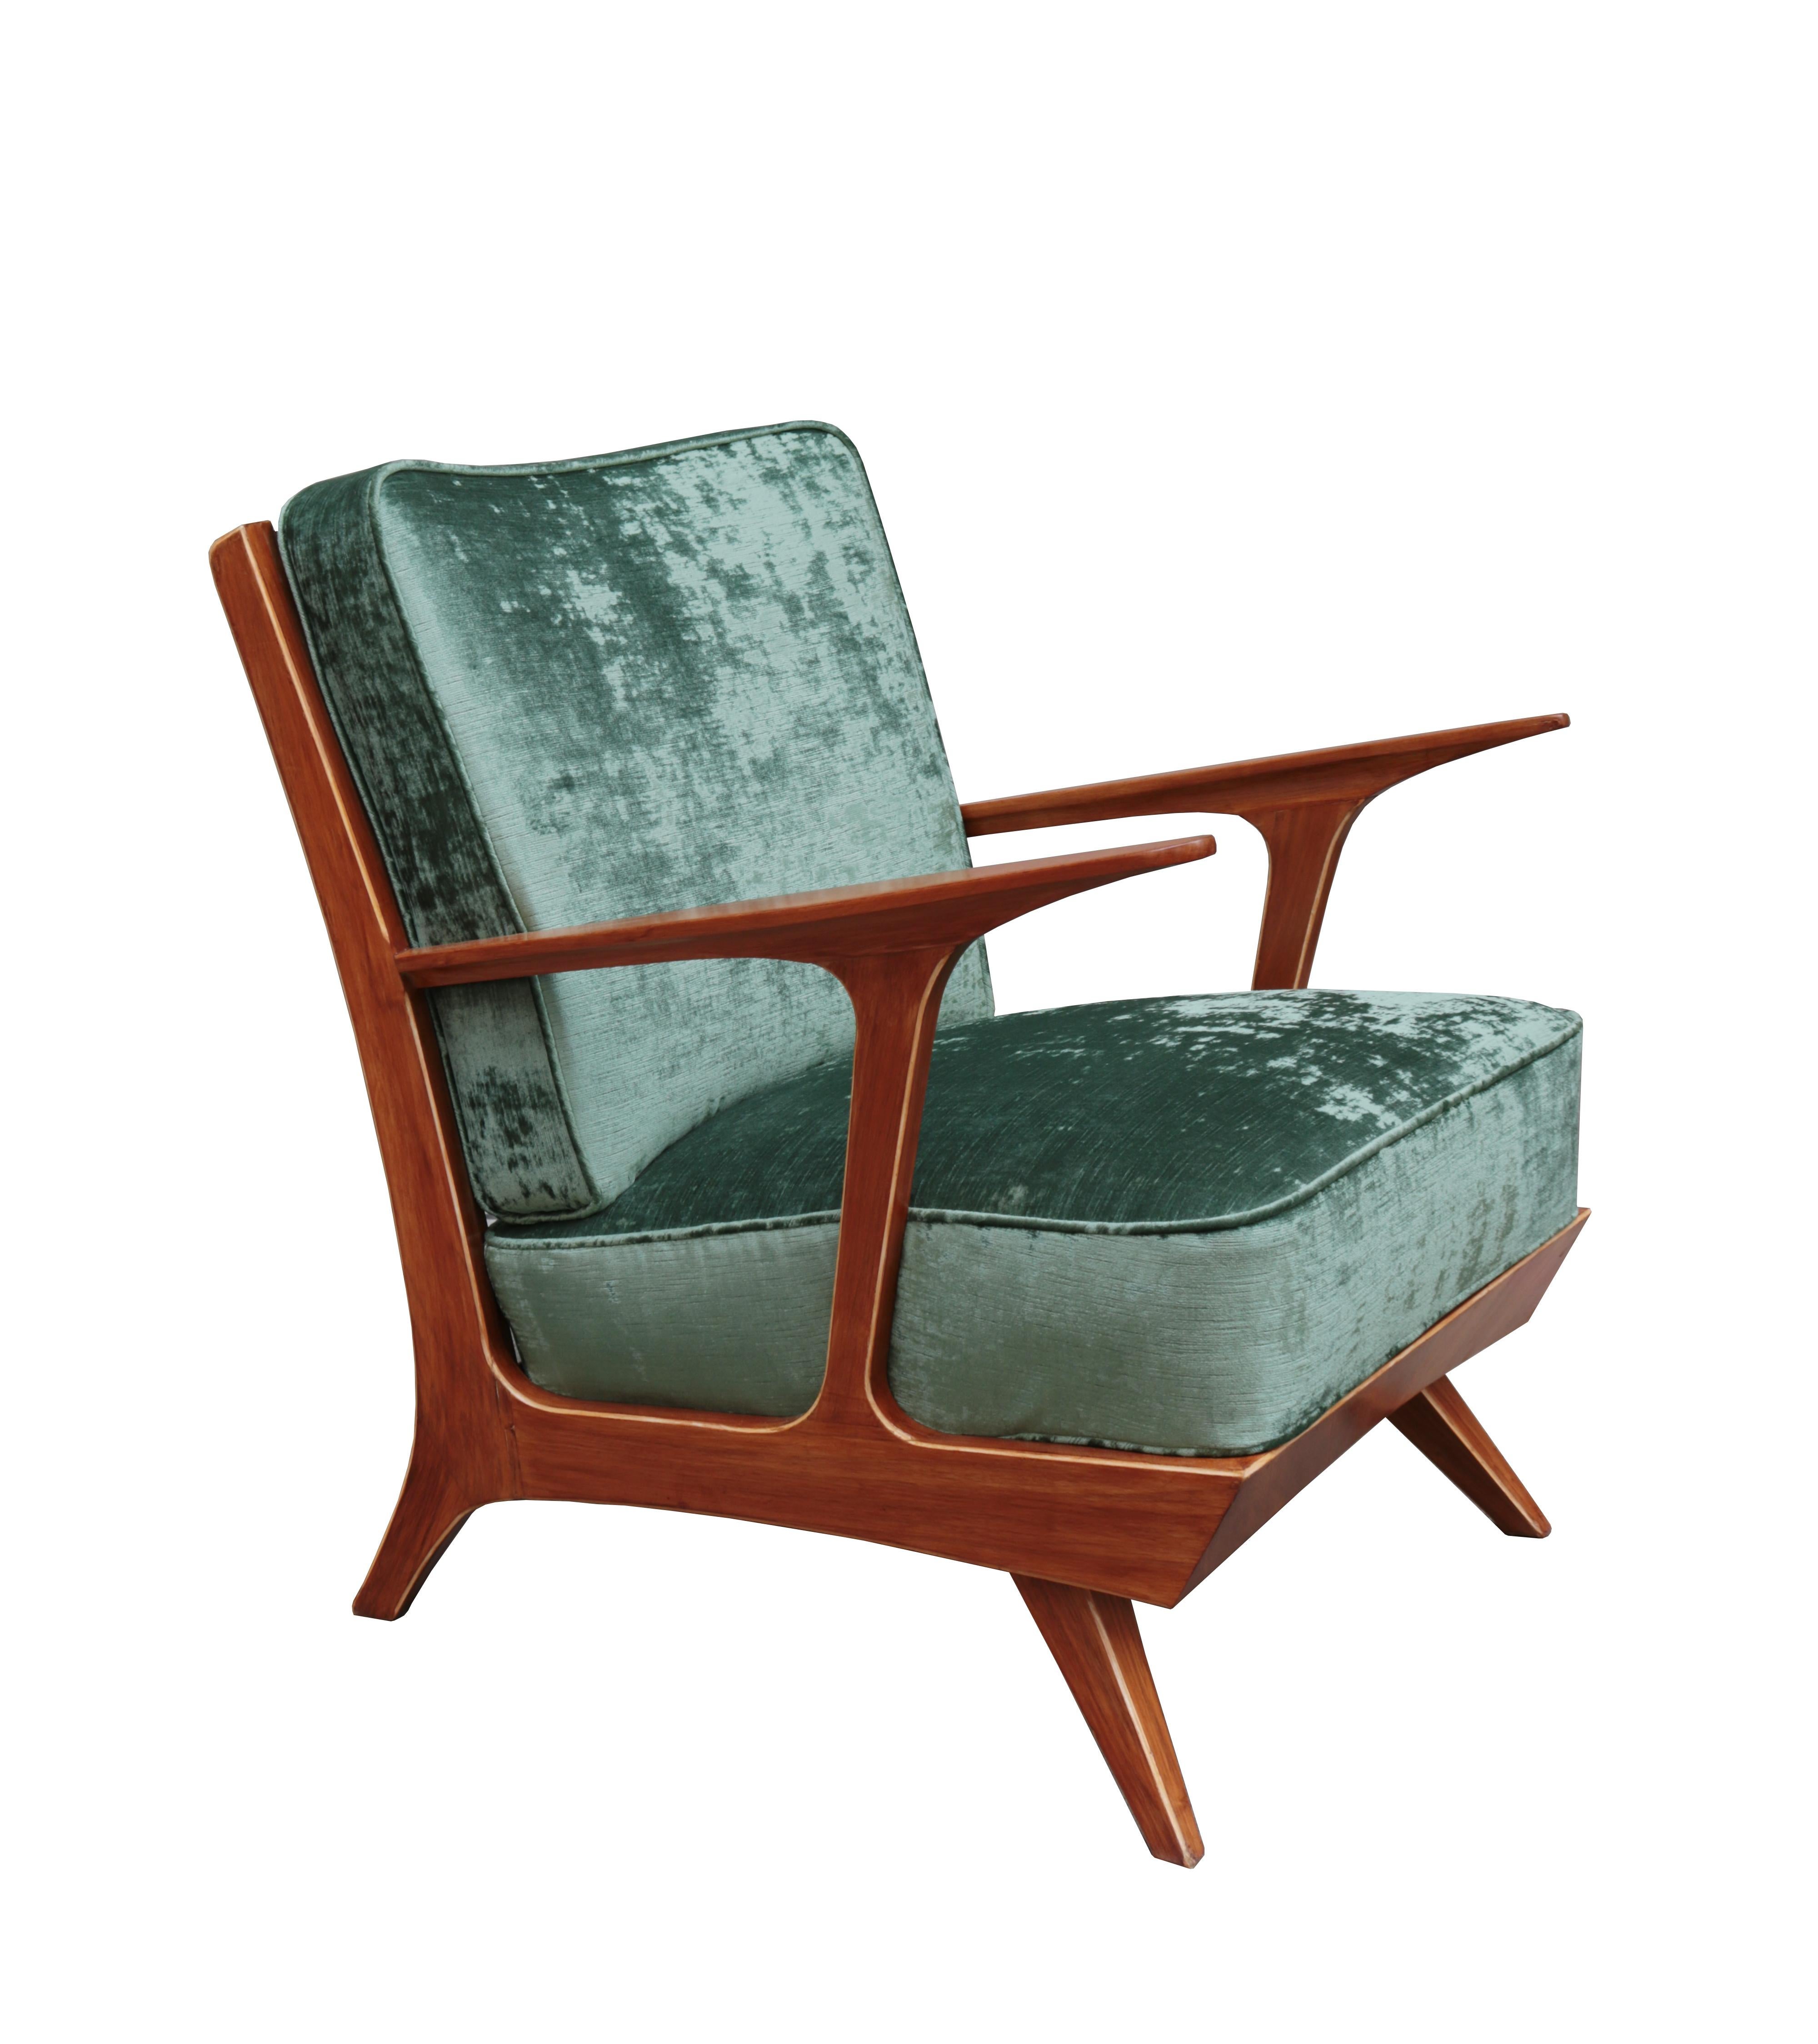 Pair of modern midcentury armchairs. Mahogany with contrast edge detail.